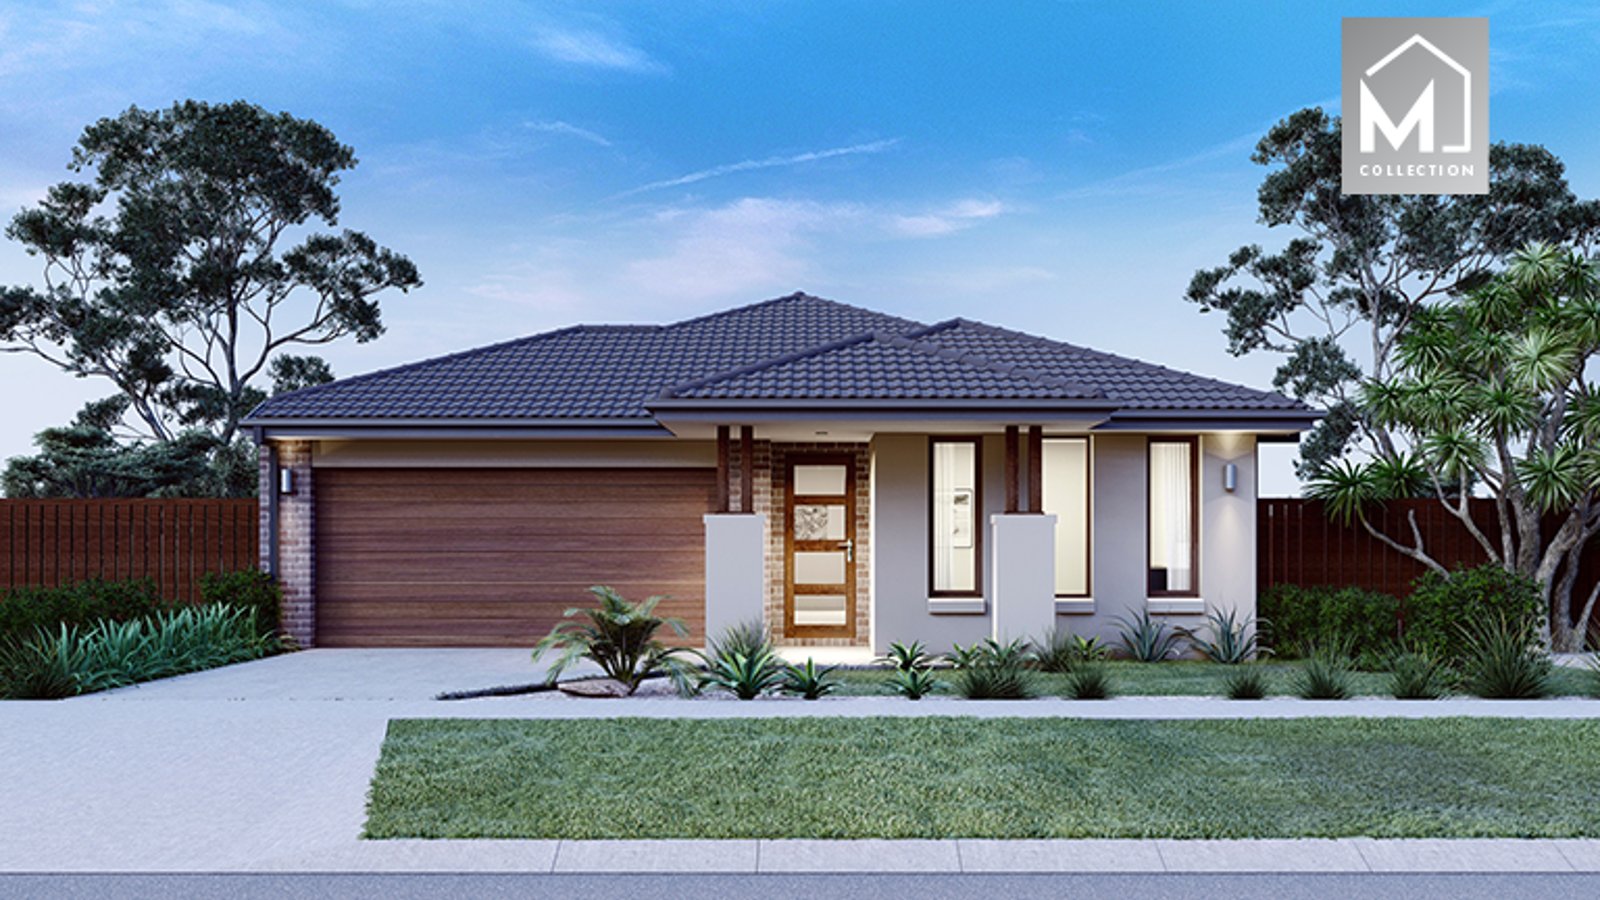 Photo of LOT 208 Masall Estate, Fraser Rise VIC 3336 AUS